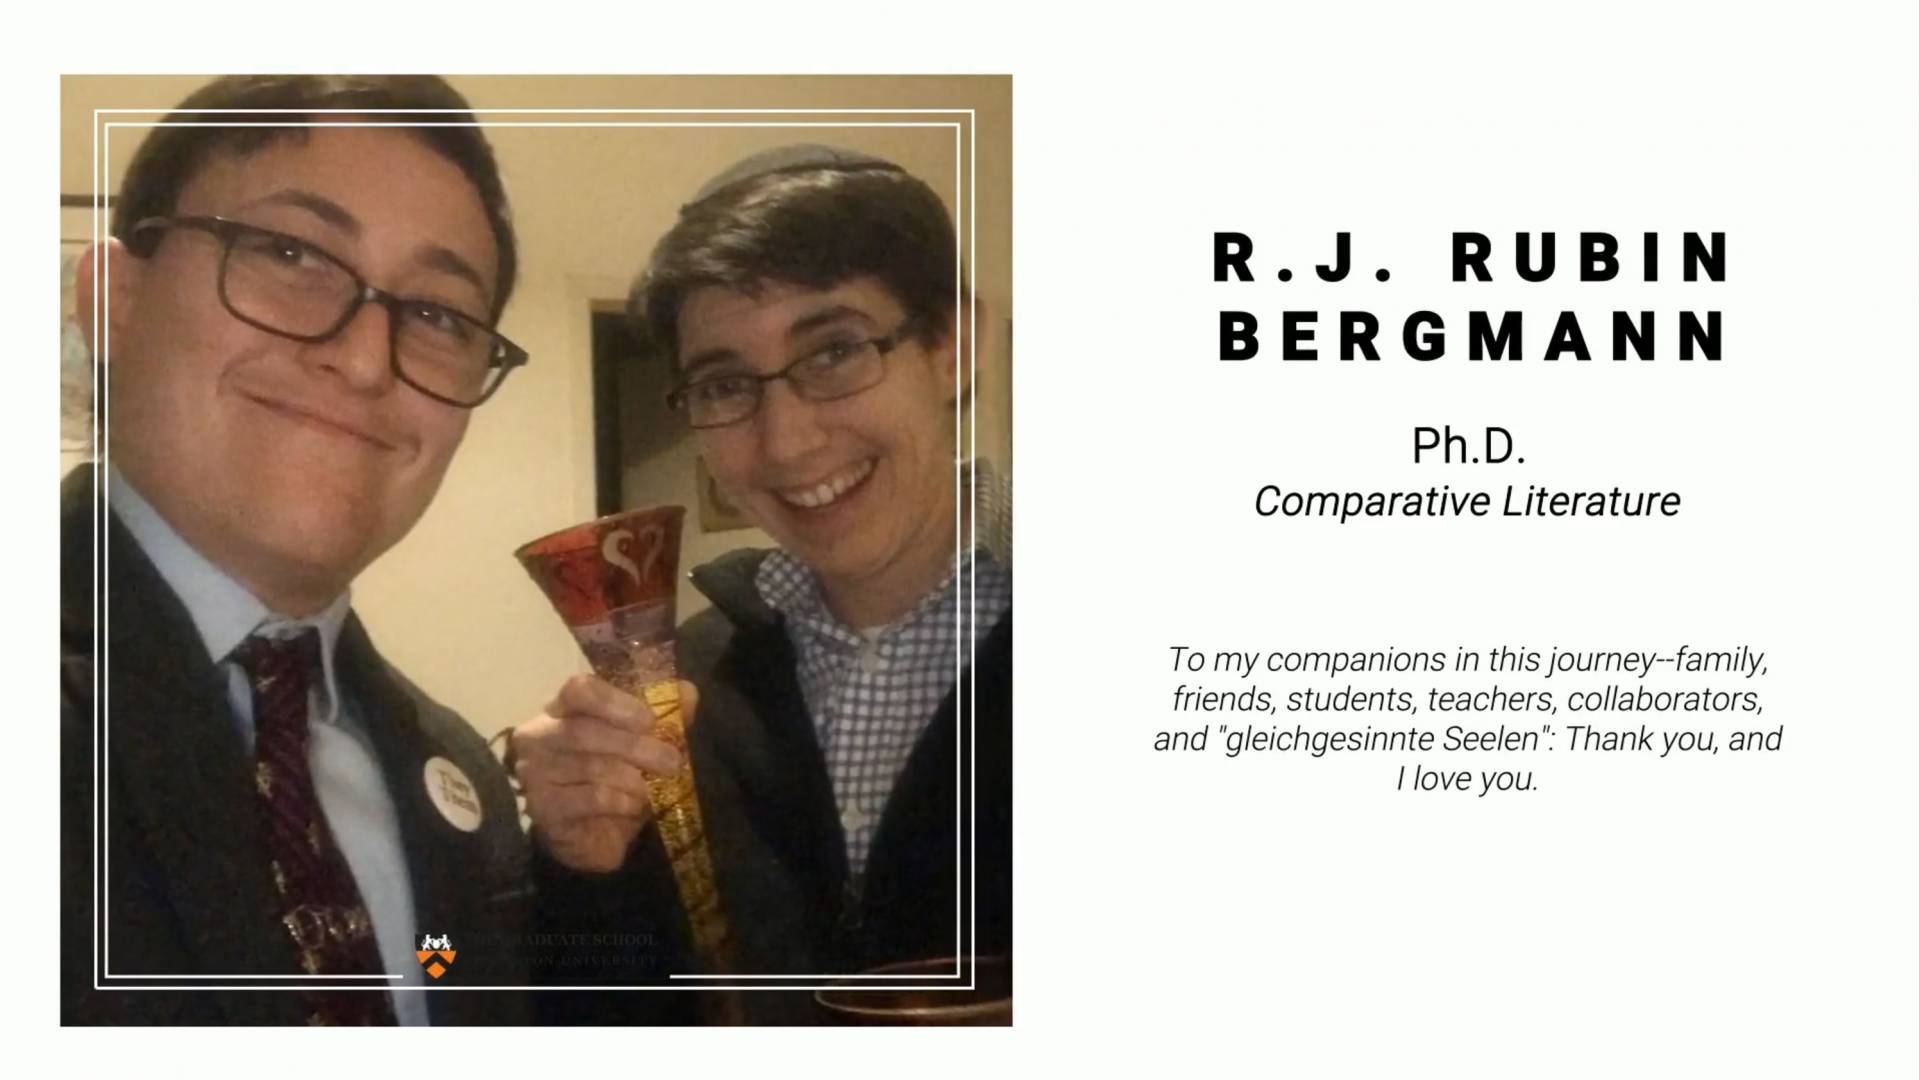 RJ Rubin Bergmann, PhD Comparative Literature. To my companions in the journey -- family, friends, student, teachers, collaborators, and "gleichgesinnte Seelen": Thank you, and I love you.